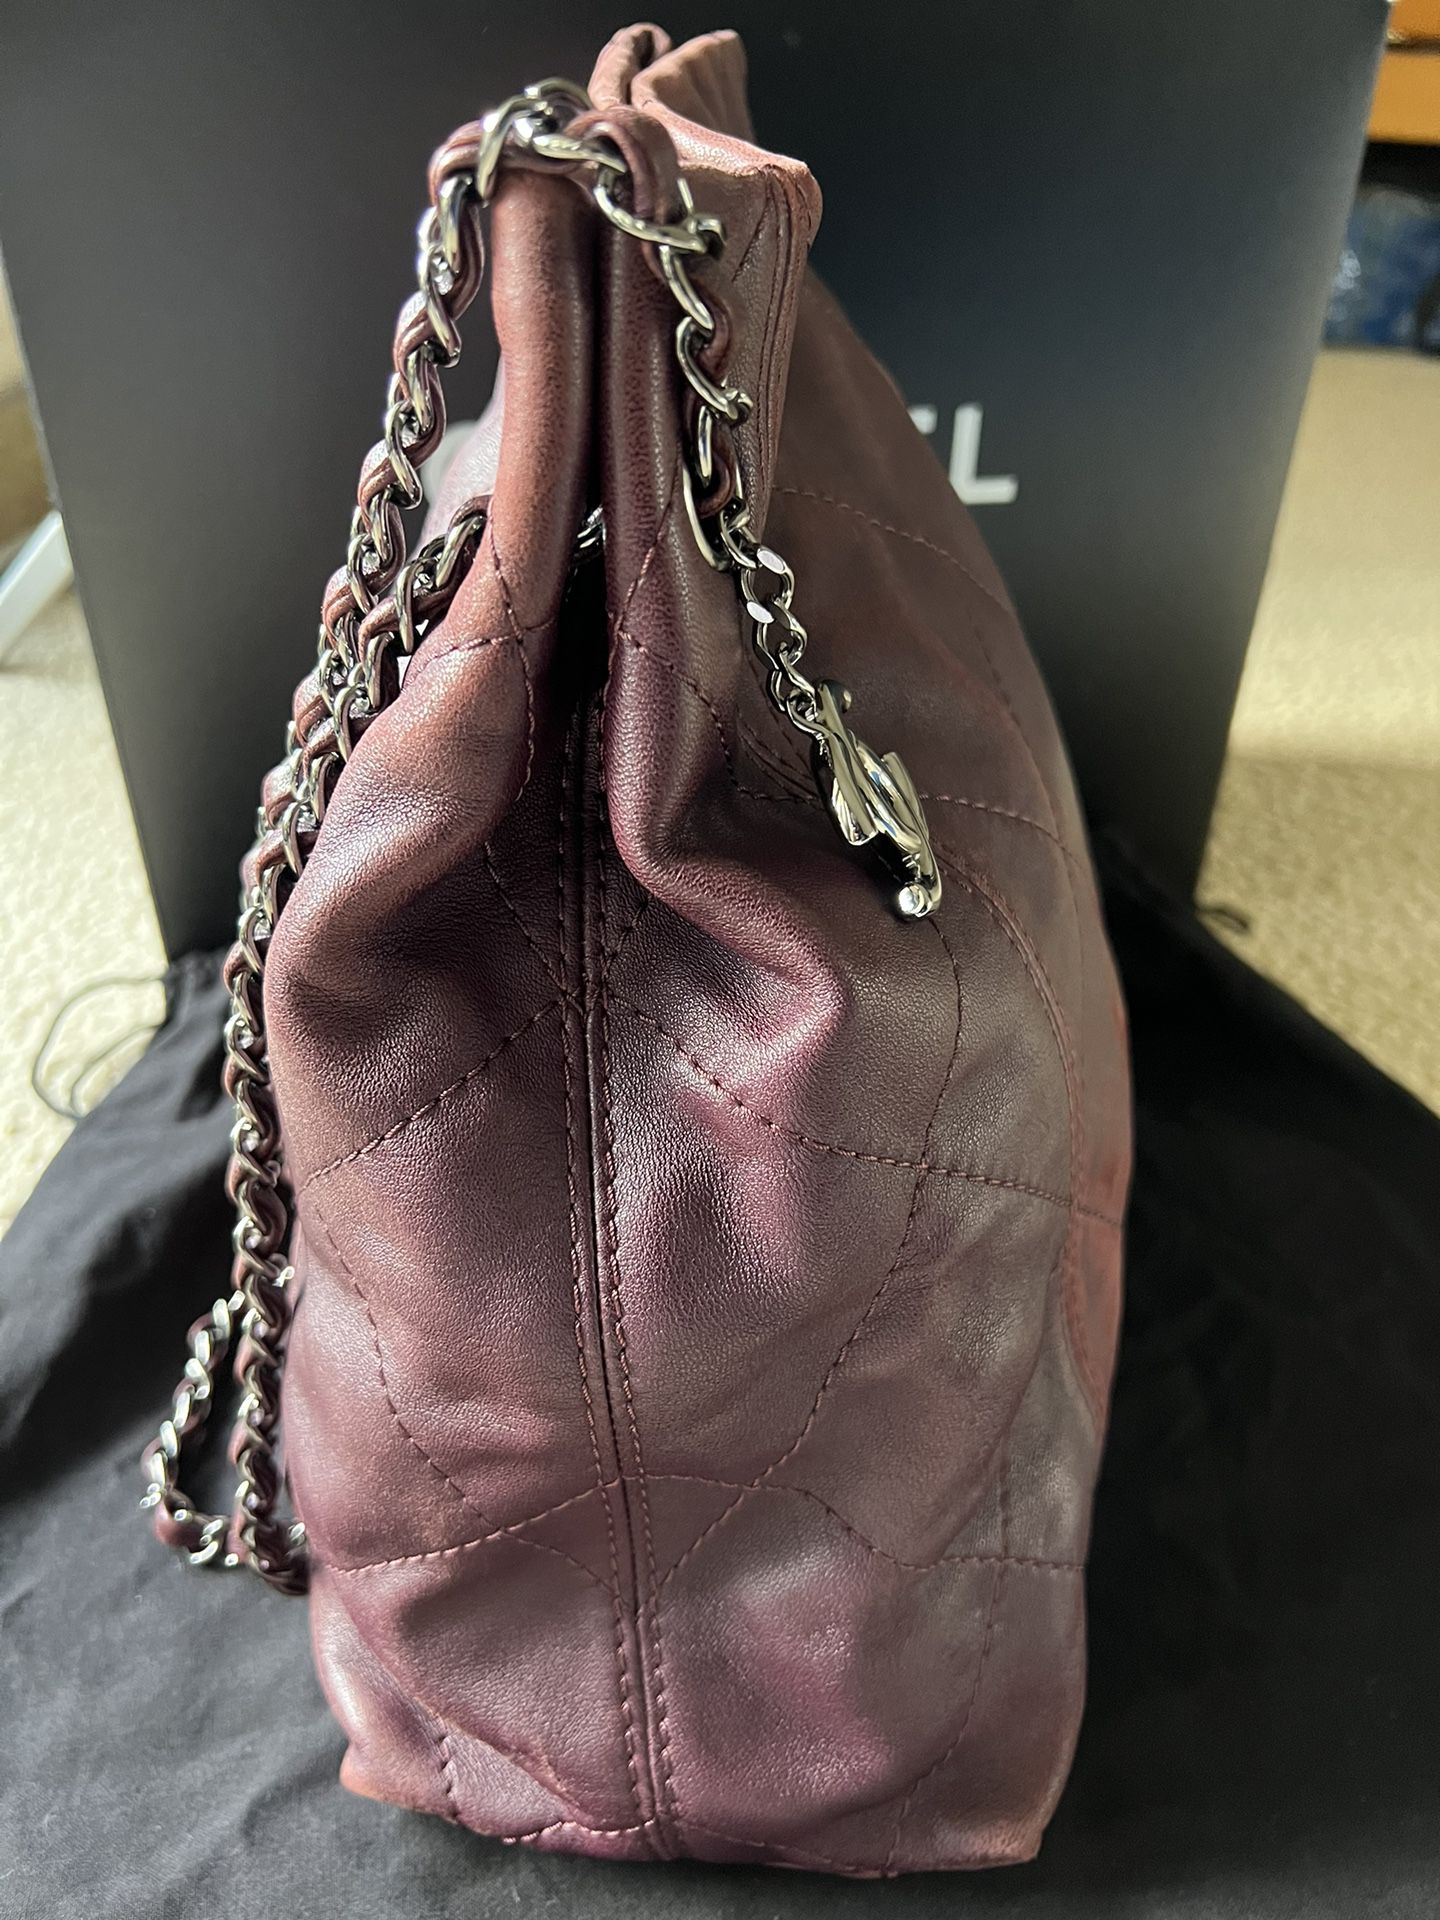 Used Authentic Chanel large tote bag for Sale in San Diego, CA - OfferUp